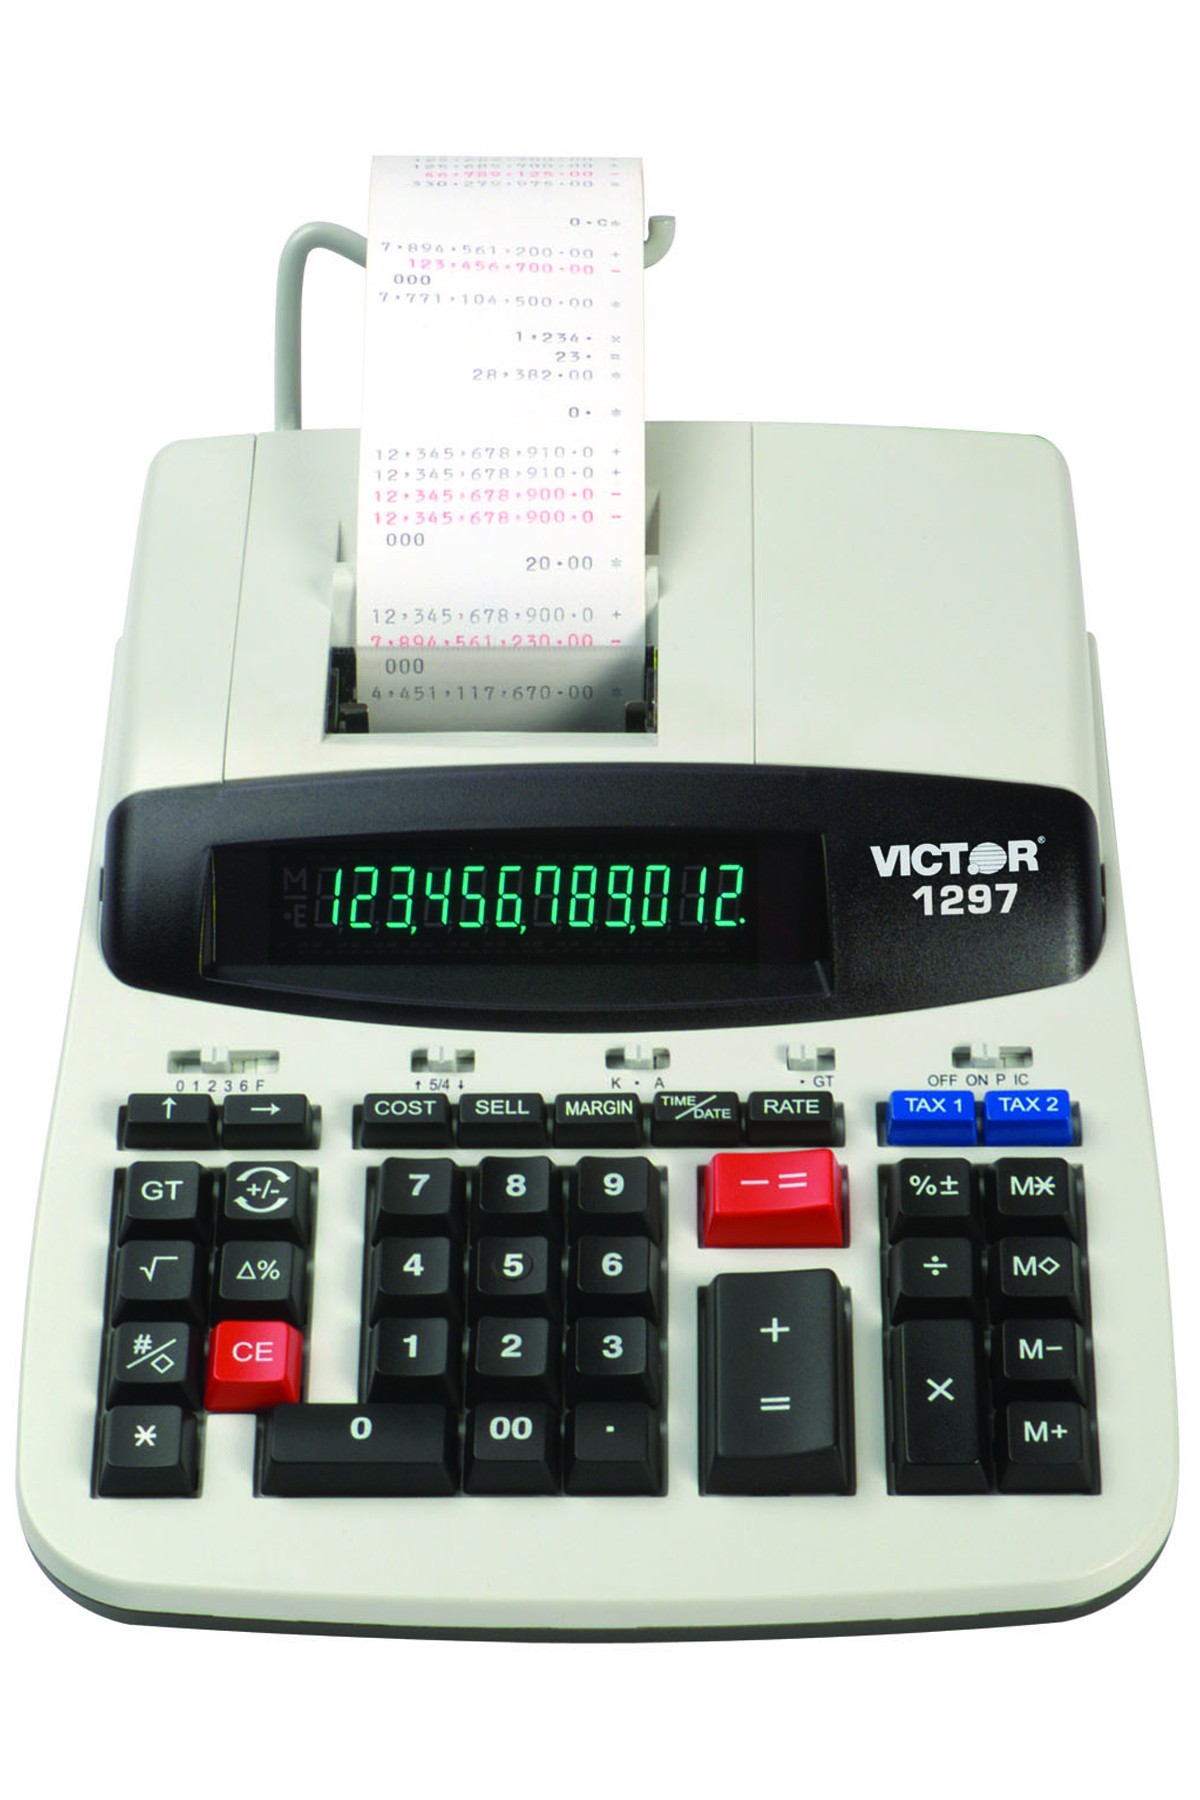 Victor 1297, Victor 1297 Printing Calculator, VCT1297, VCT 1297 Office  Supply Hut